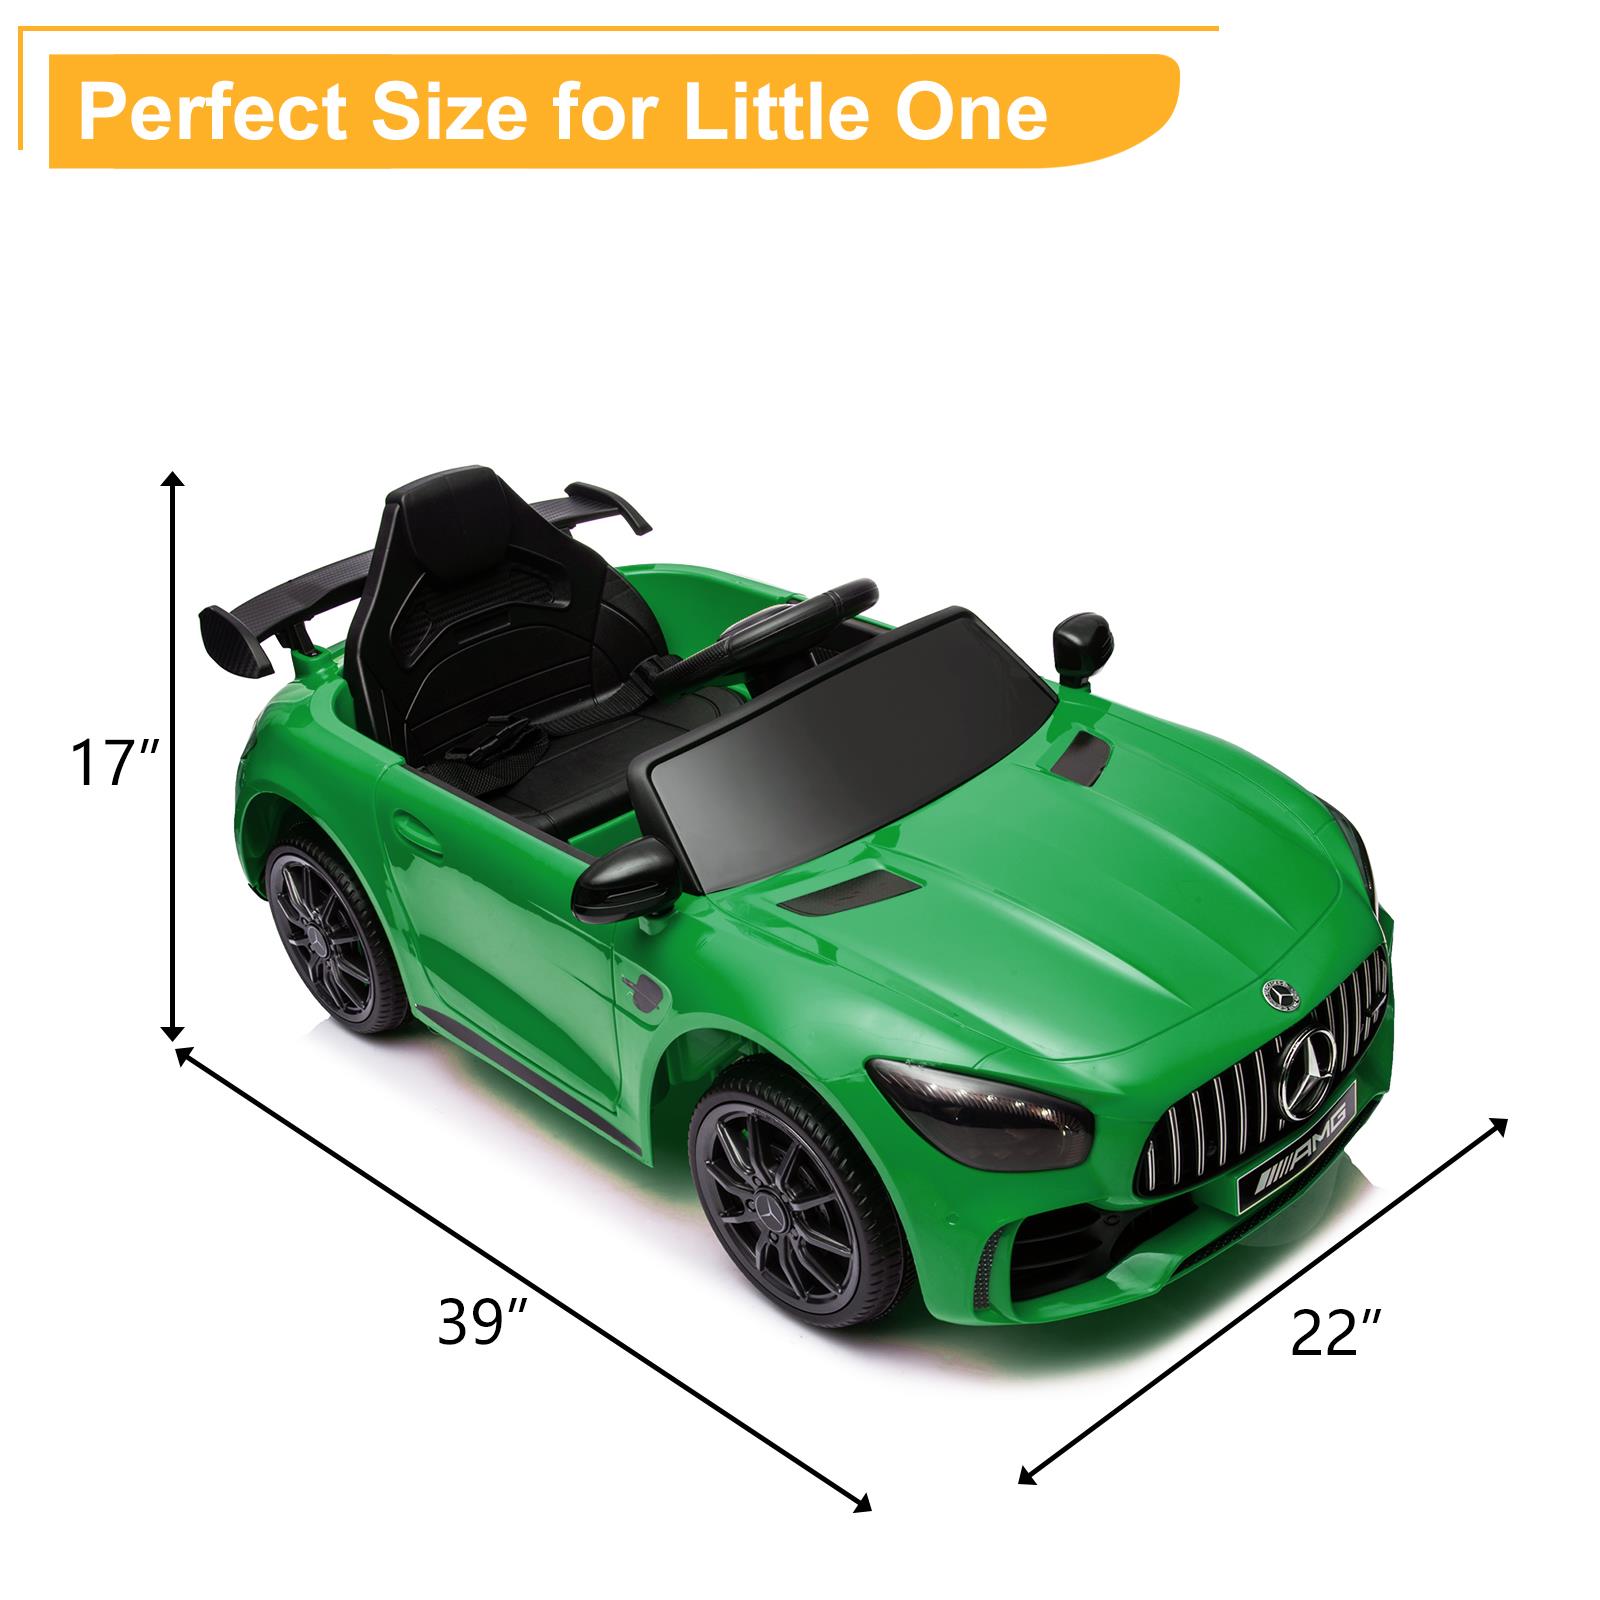 UBesGoo 12V Licensed Mercedes-Benz Electric Ride on Car Toy for Toddler Kid w/ Remote Control, LED Lights, Green - image 3 of 9